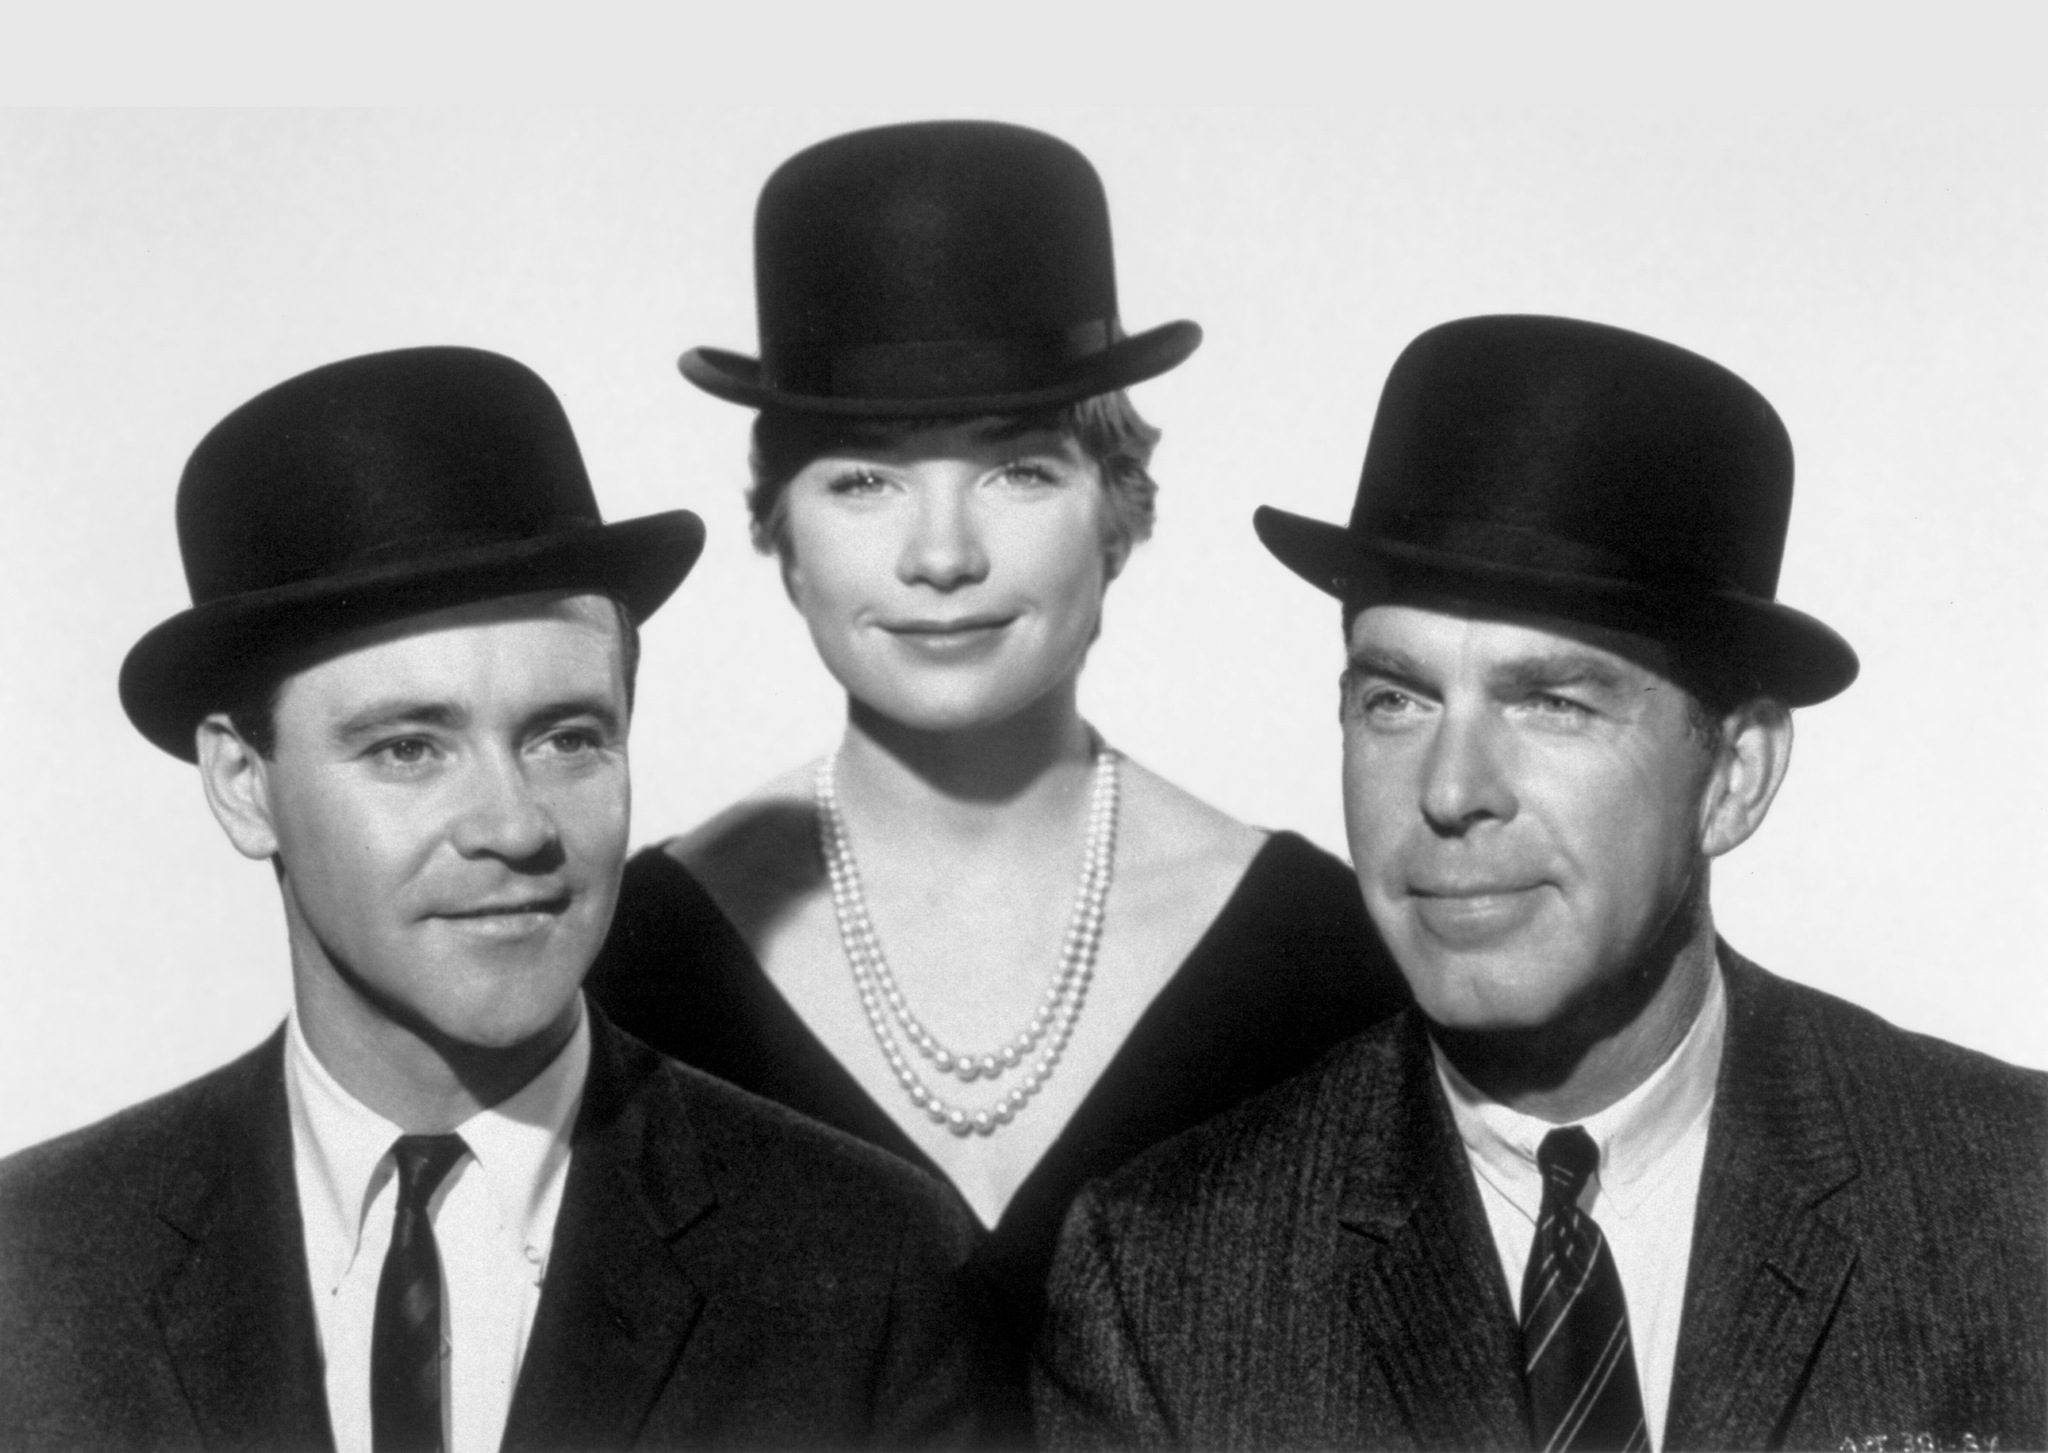 Still of Jack Lemmon, Shirley MacLaine and Fred MacMurray in The Apartment (1960)